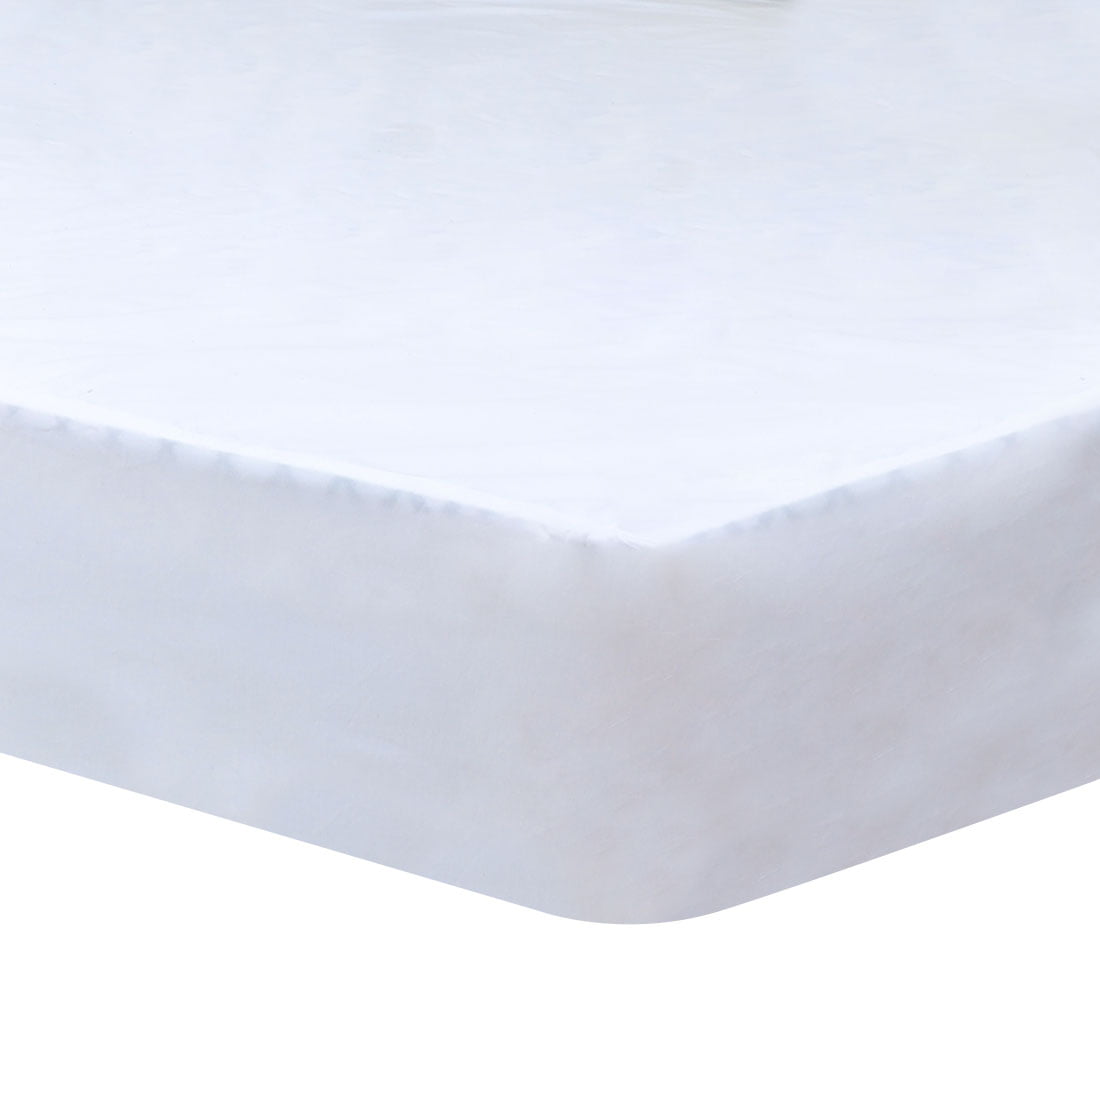 Extra deep waterproof retainer towel on mattress protector cover 